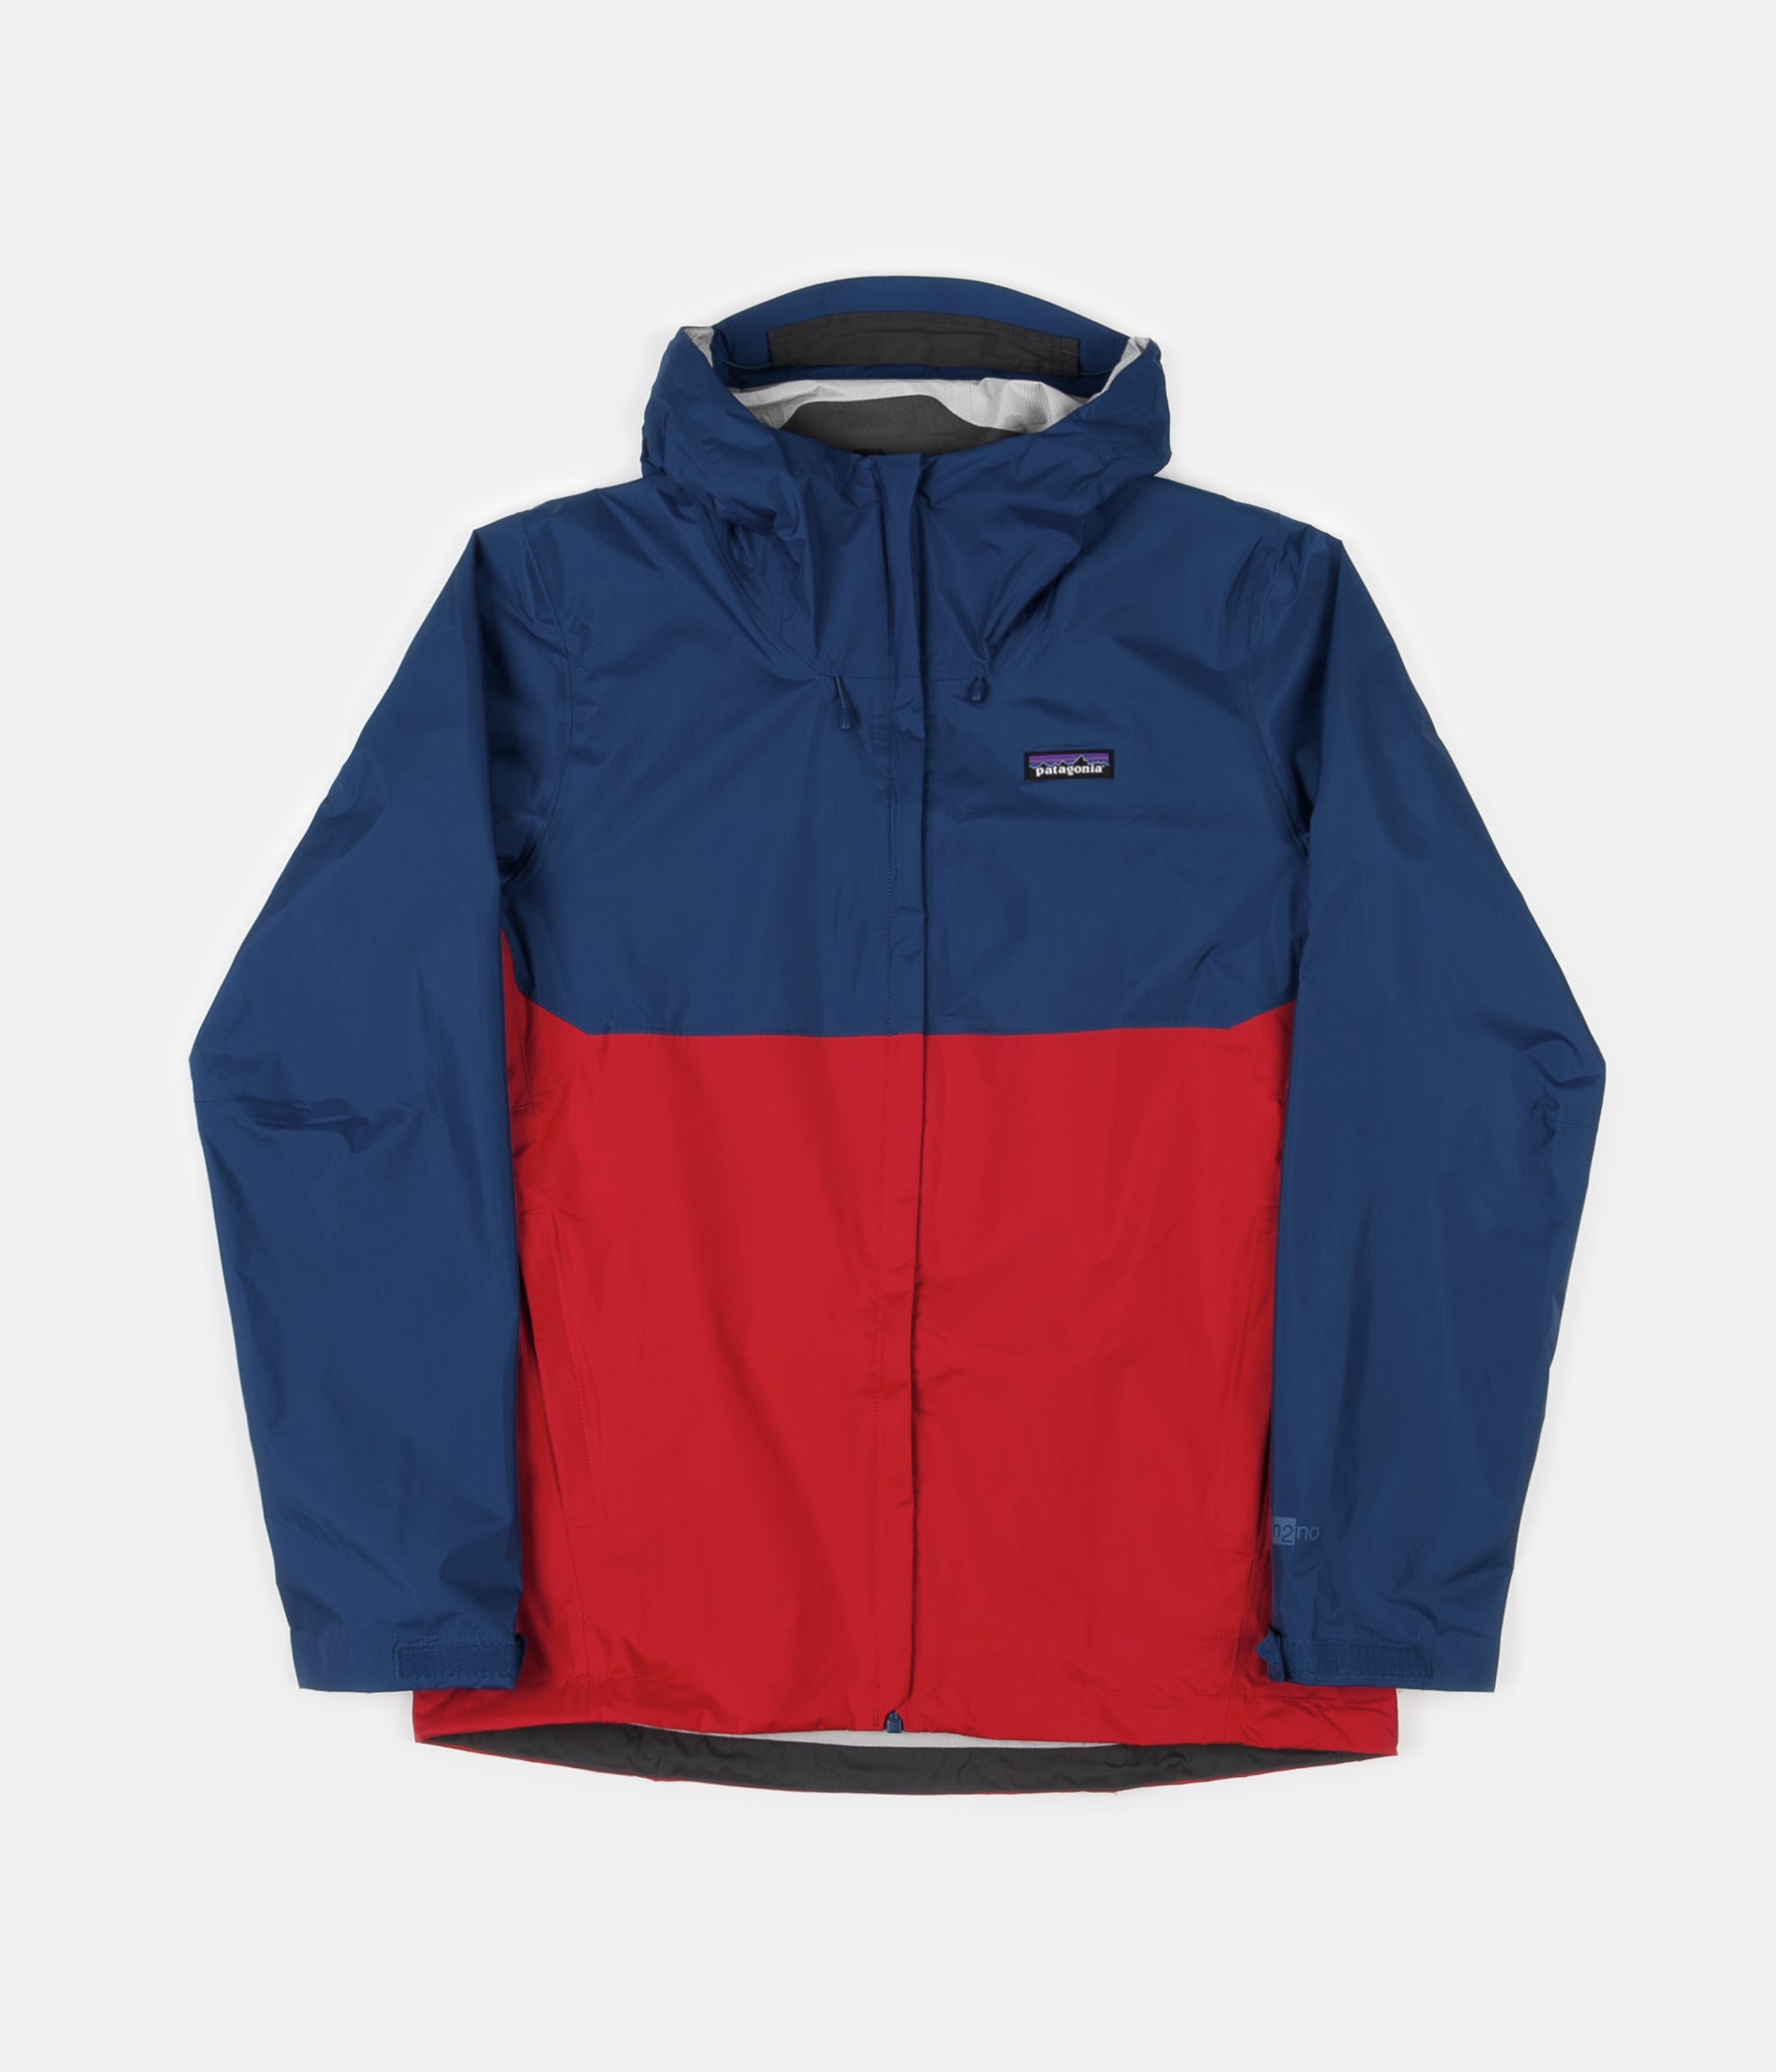 Patagonia Torrentshell Jacket - Big Sur Blue / Fire Red | Always in Colour